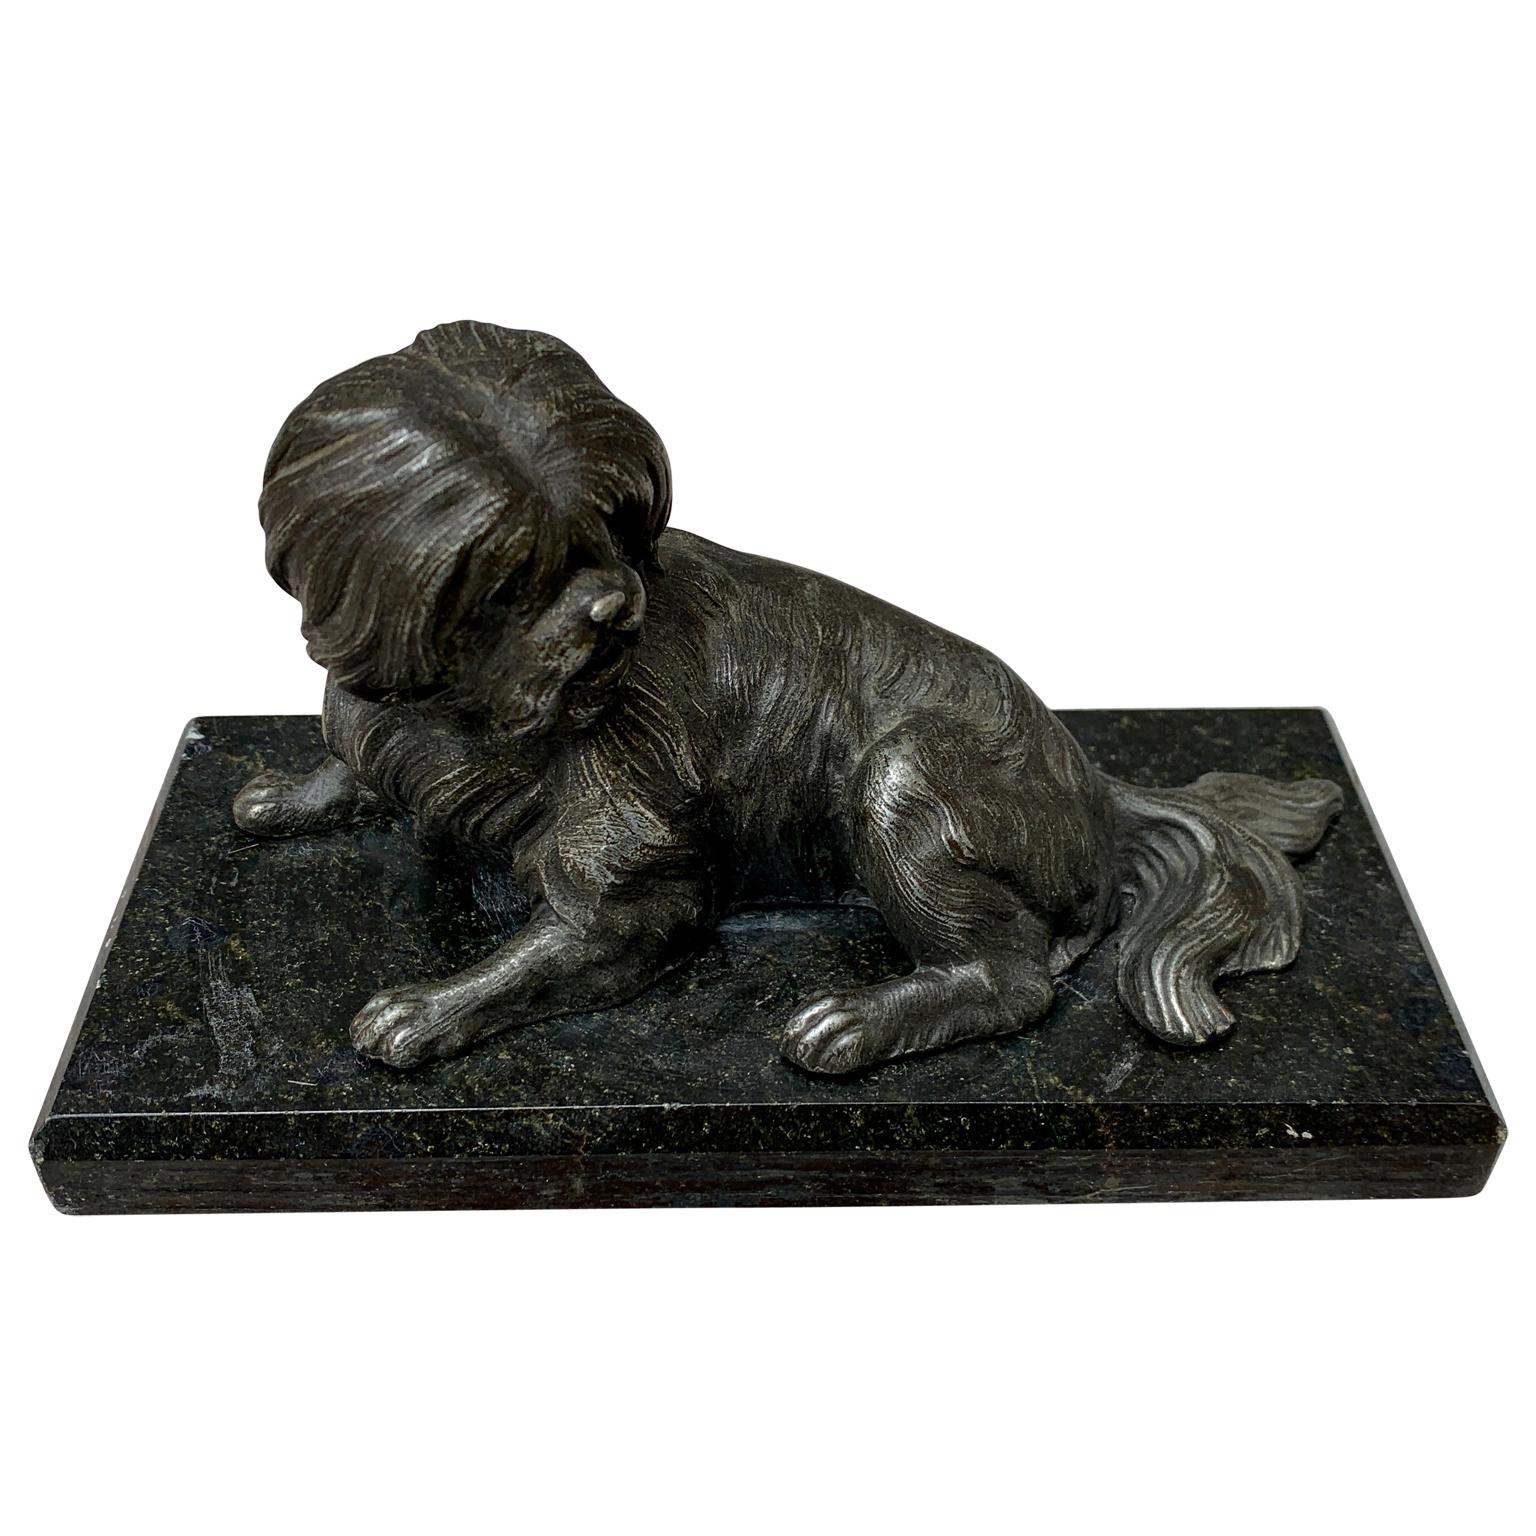 Mid 19th century bronze dog paperweight perched on beveled black marble base. The detailing of the dog's hair and body is exquisite. This sweet little piece is perfect as a desk accessory, bookend, or sitting alone gracing a shelf. Functional and